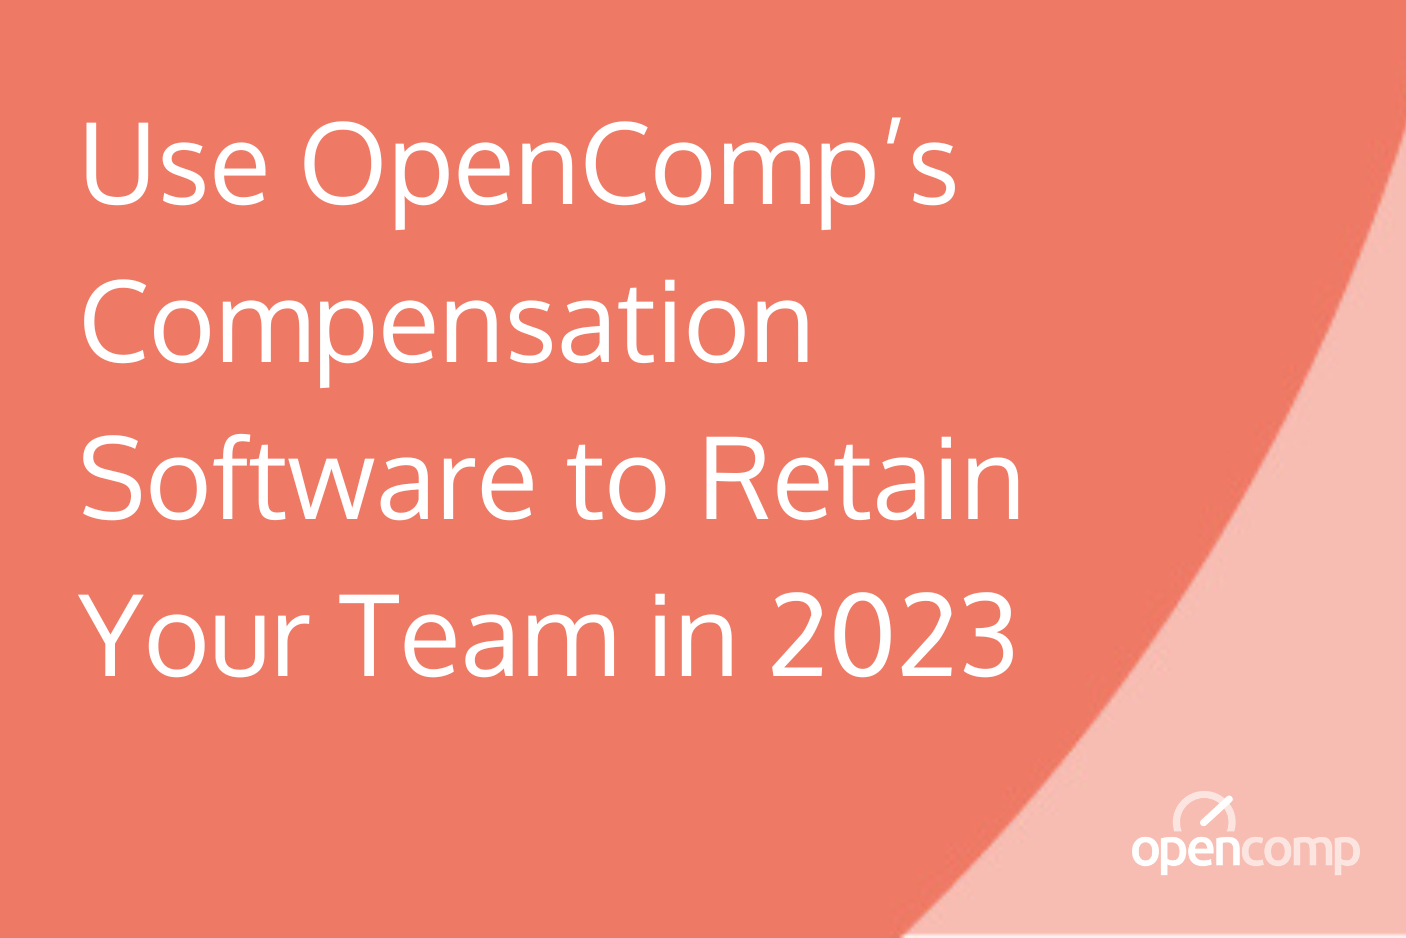 Use OpenComp’s Compensation Software to Retain Your Team in 2023